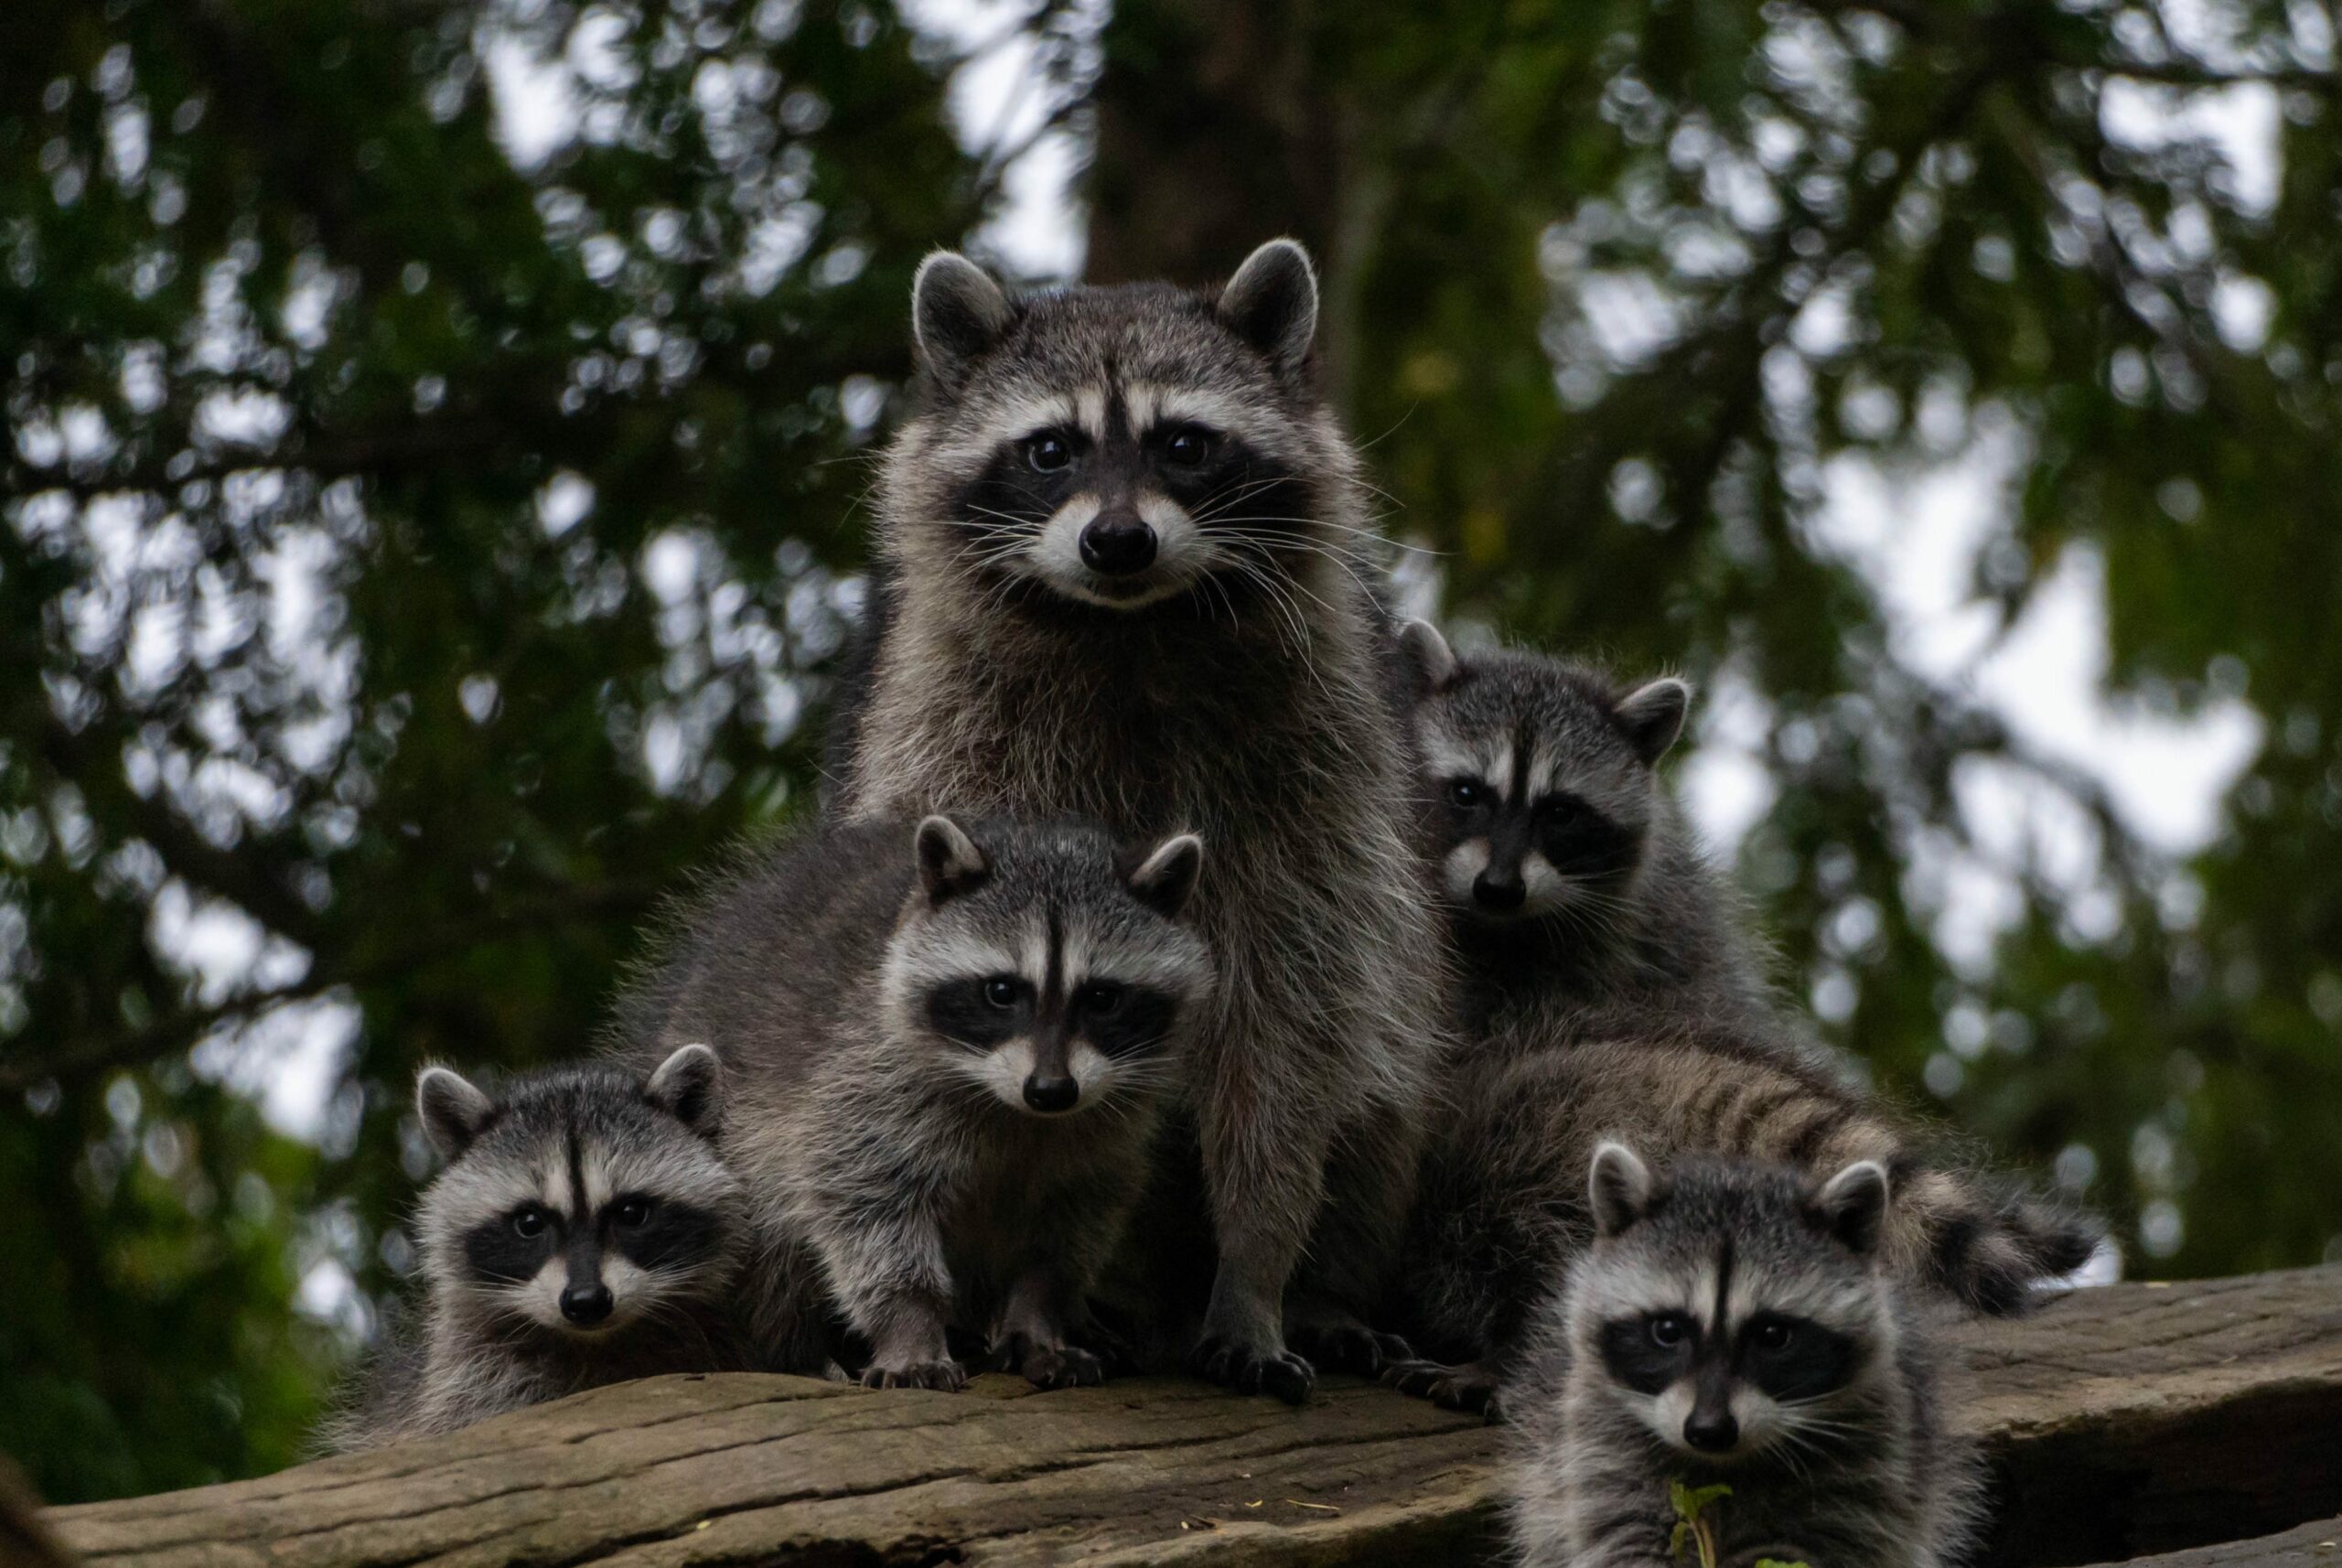 Family of Raccoons in the wilderness